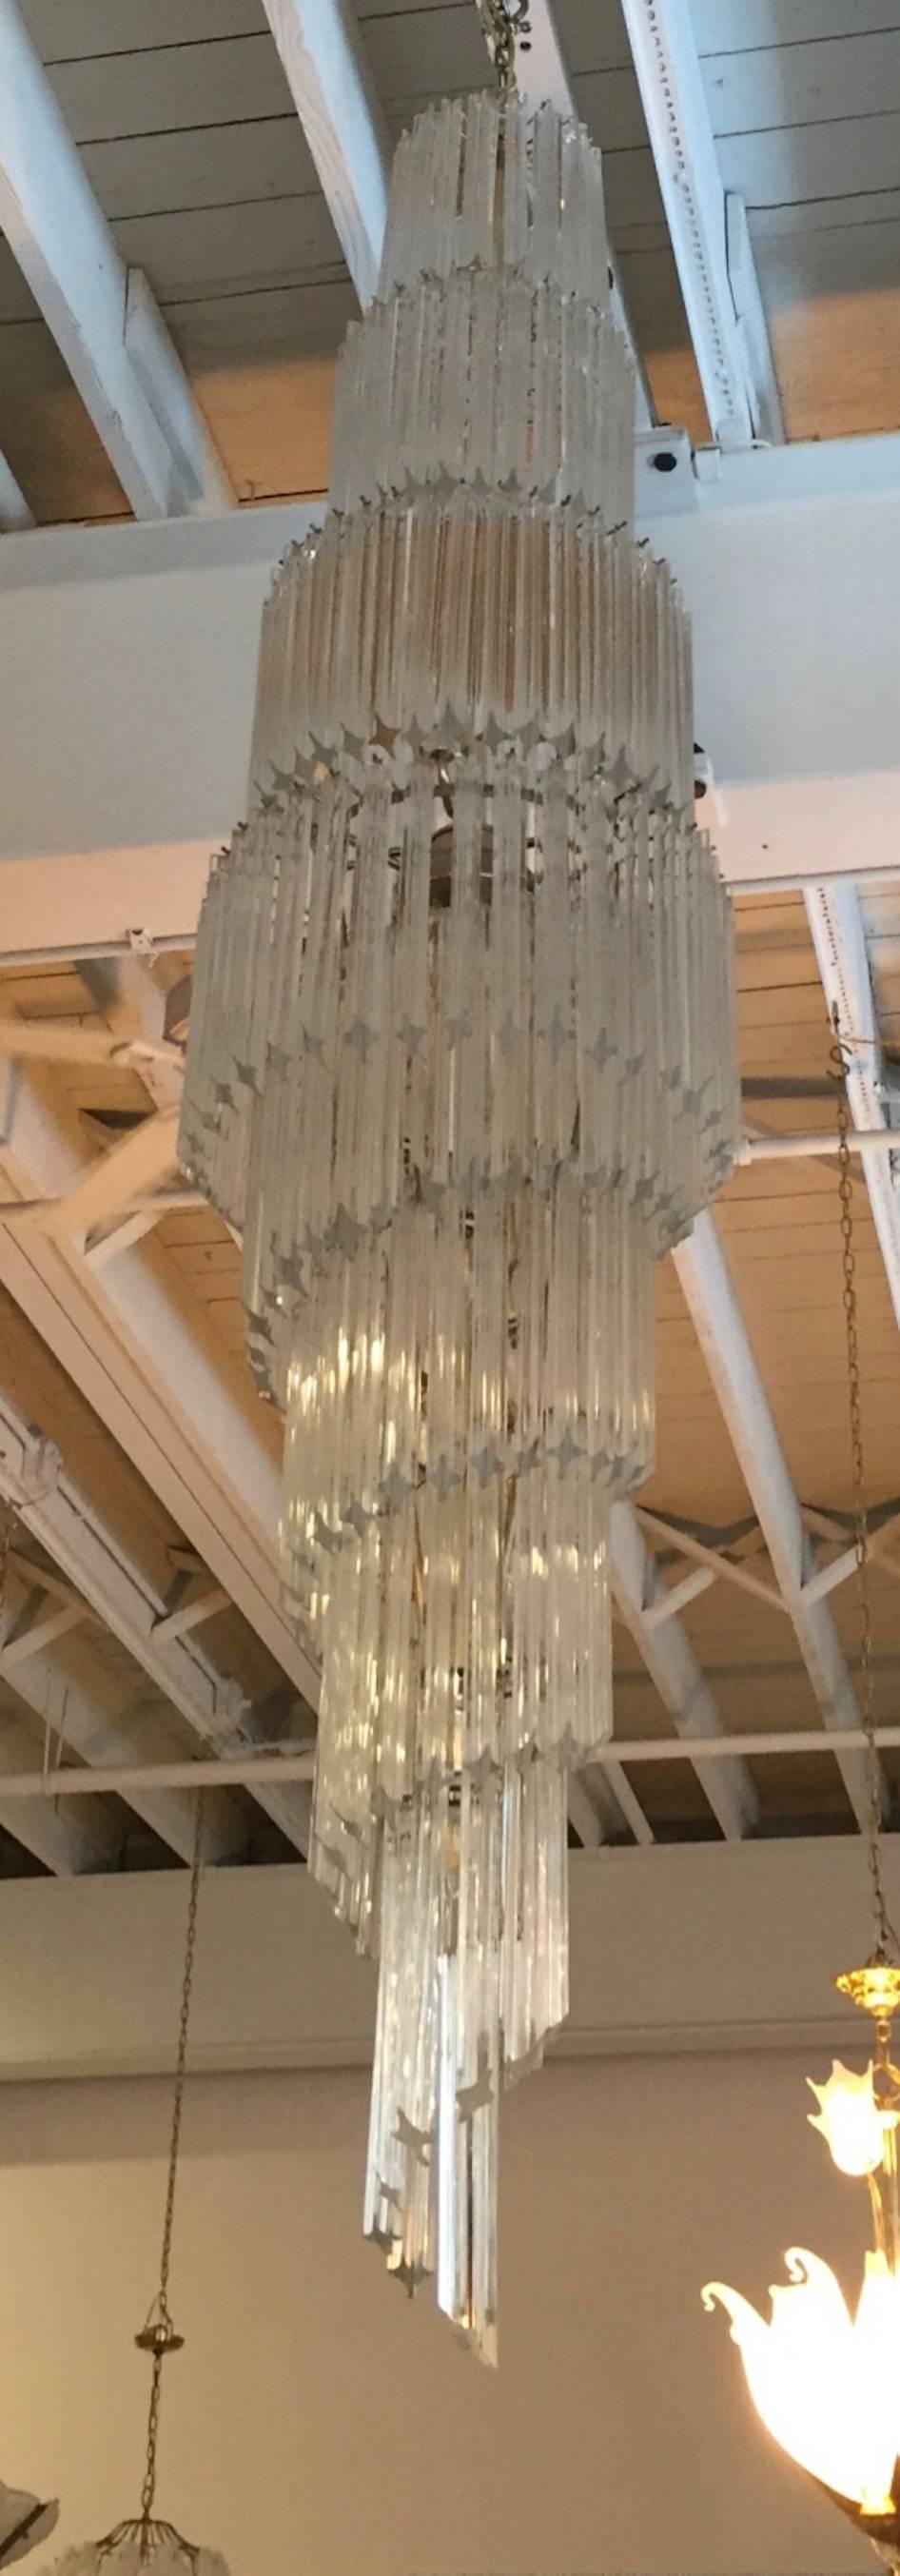 Monumental Mid-Century Modern Italian spiral chandelier by Camer. Each of the prisms is solid glass, measuring 11 inches each. They hang from hooks onto a spiral brass frame, as pictured. Any amount of chain can be added for custom hanging length of